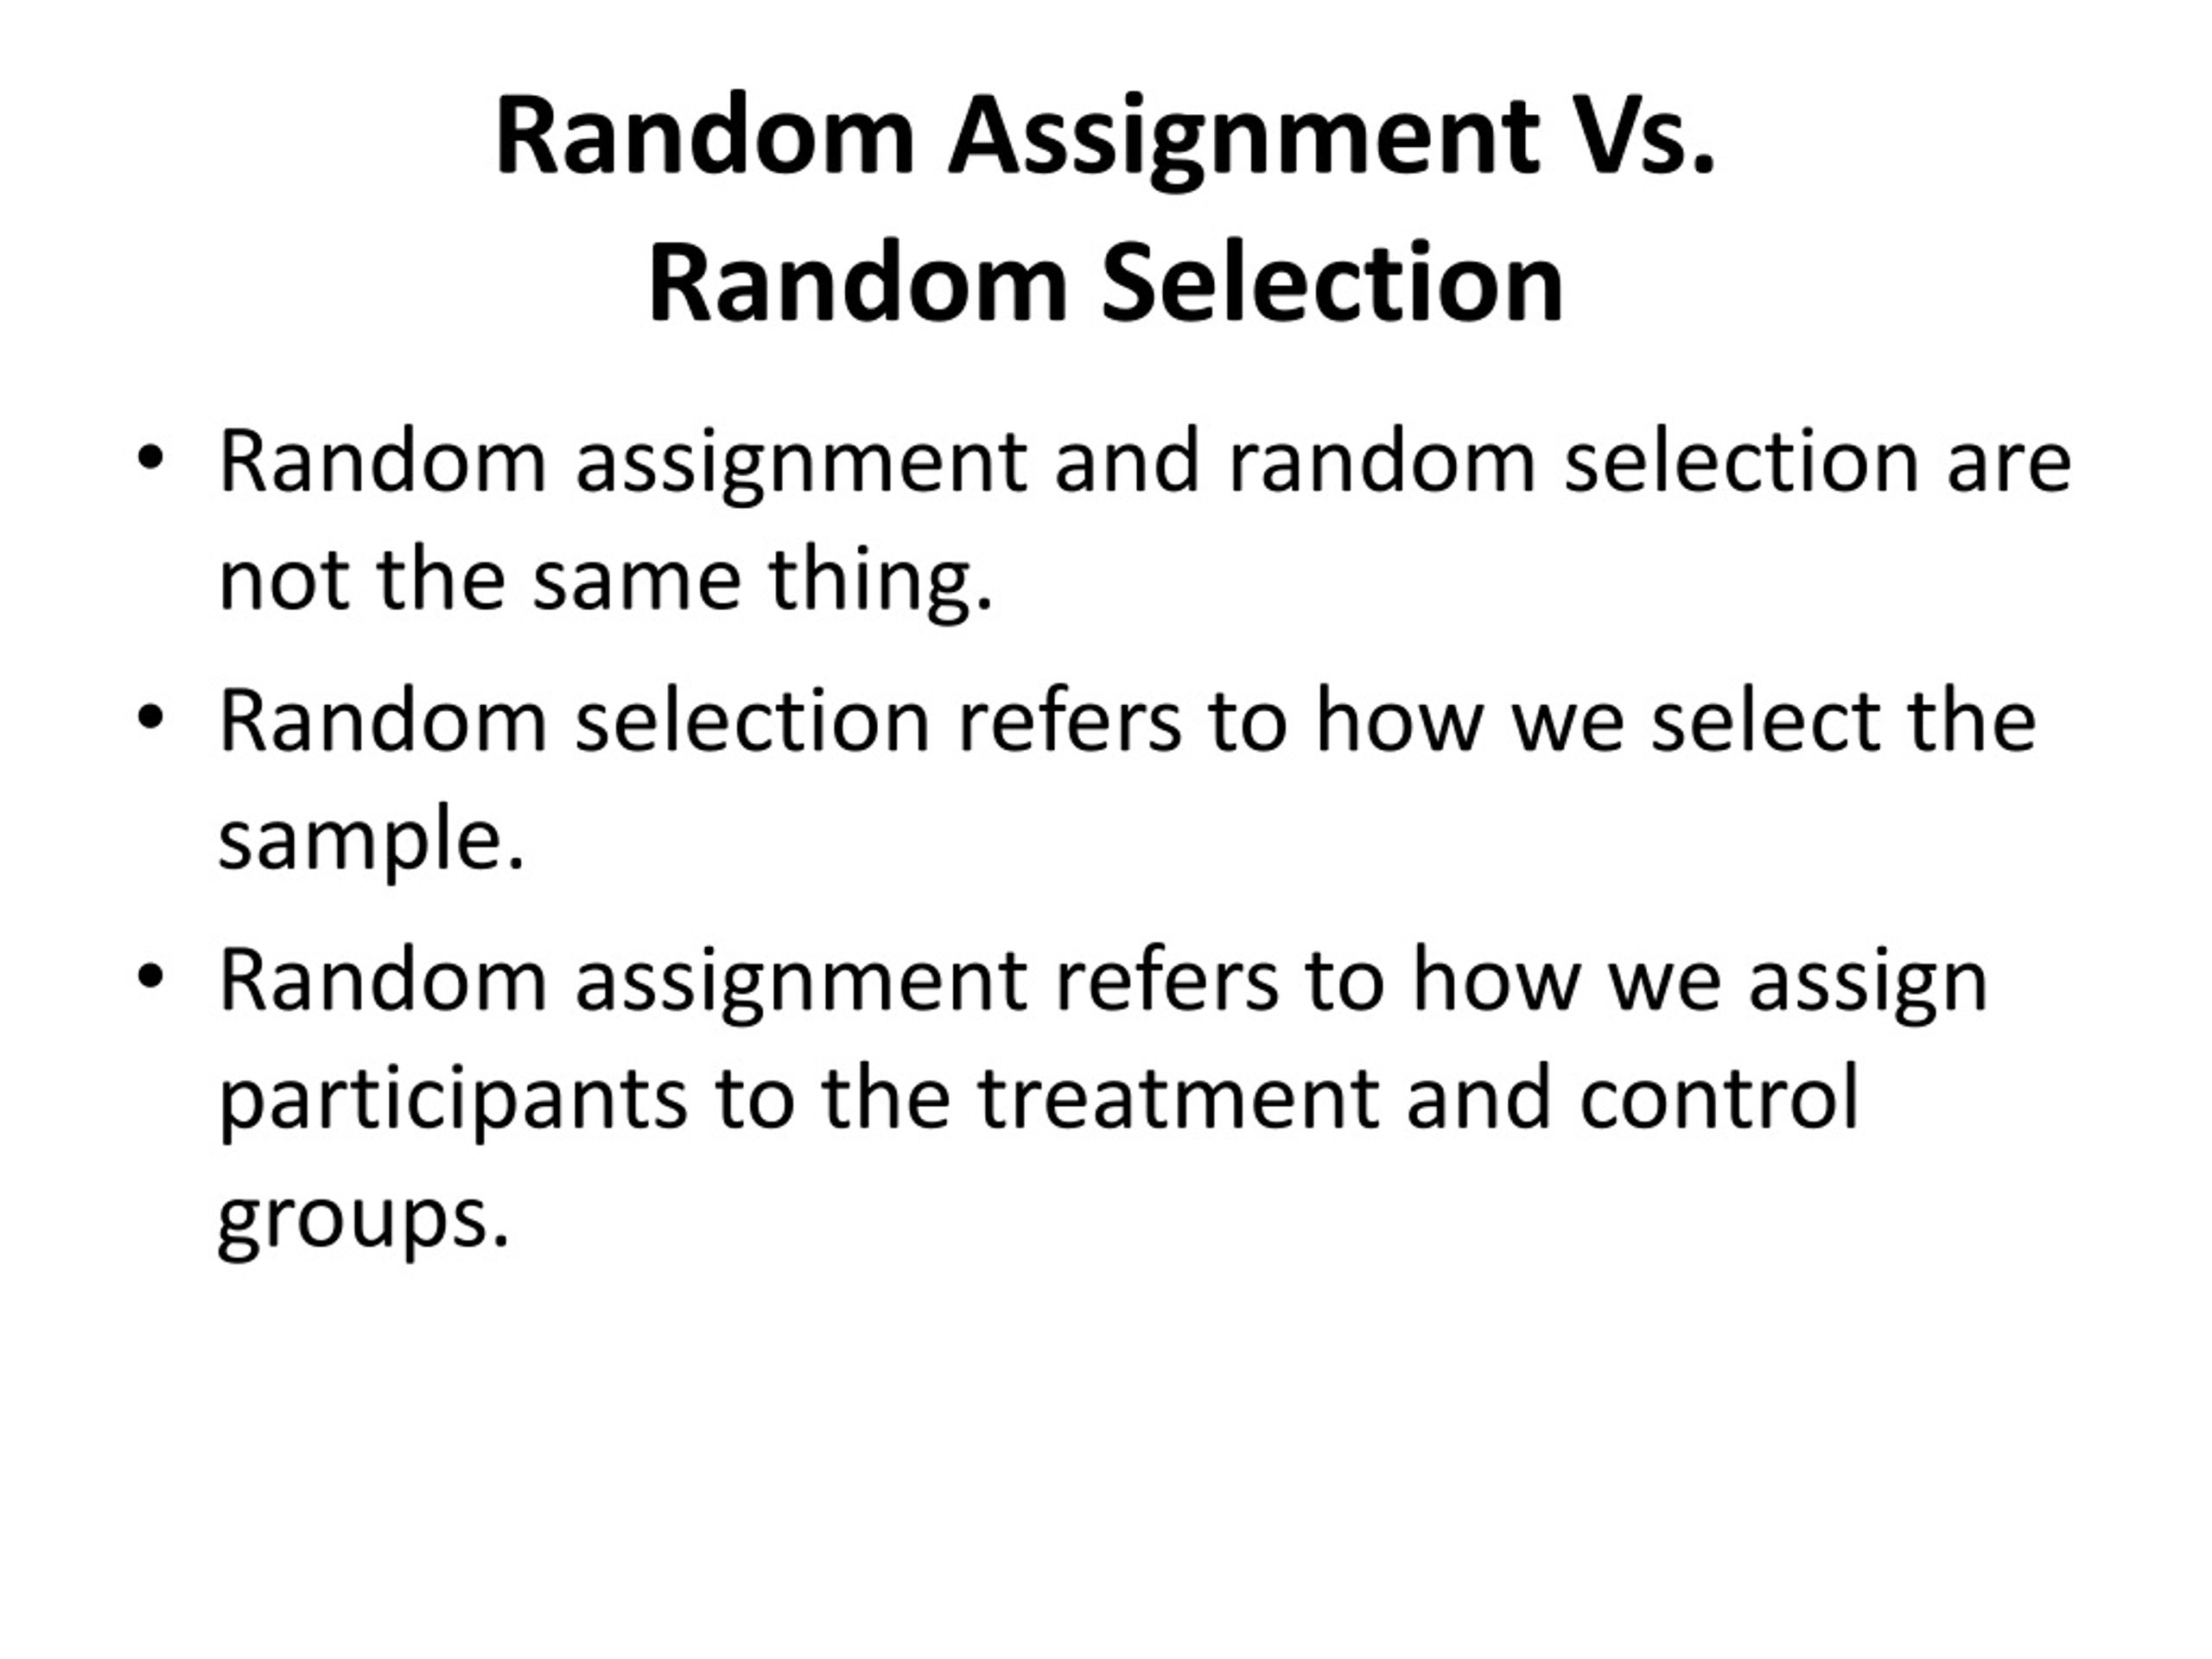 what is the difference between random selection and random assignment quizlet